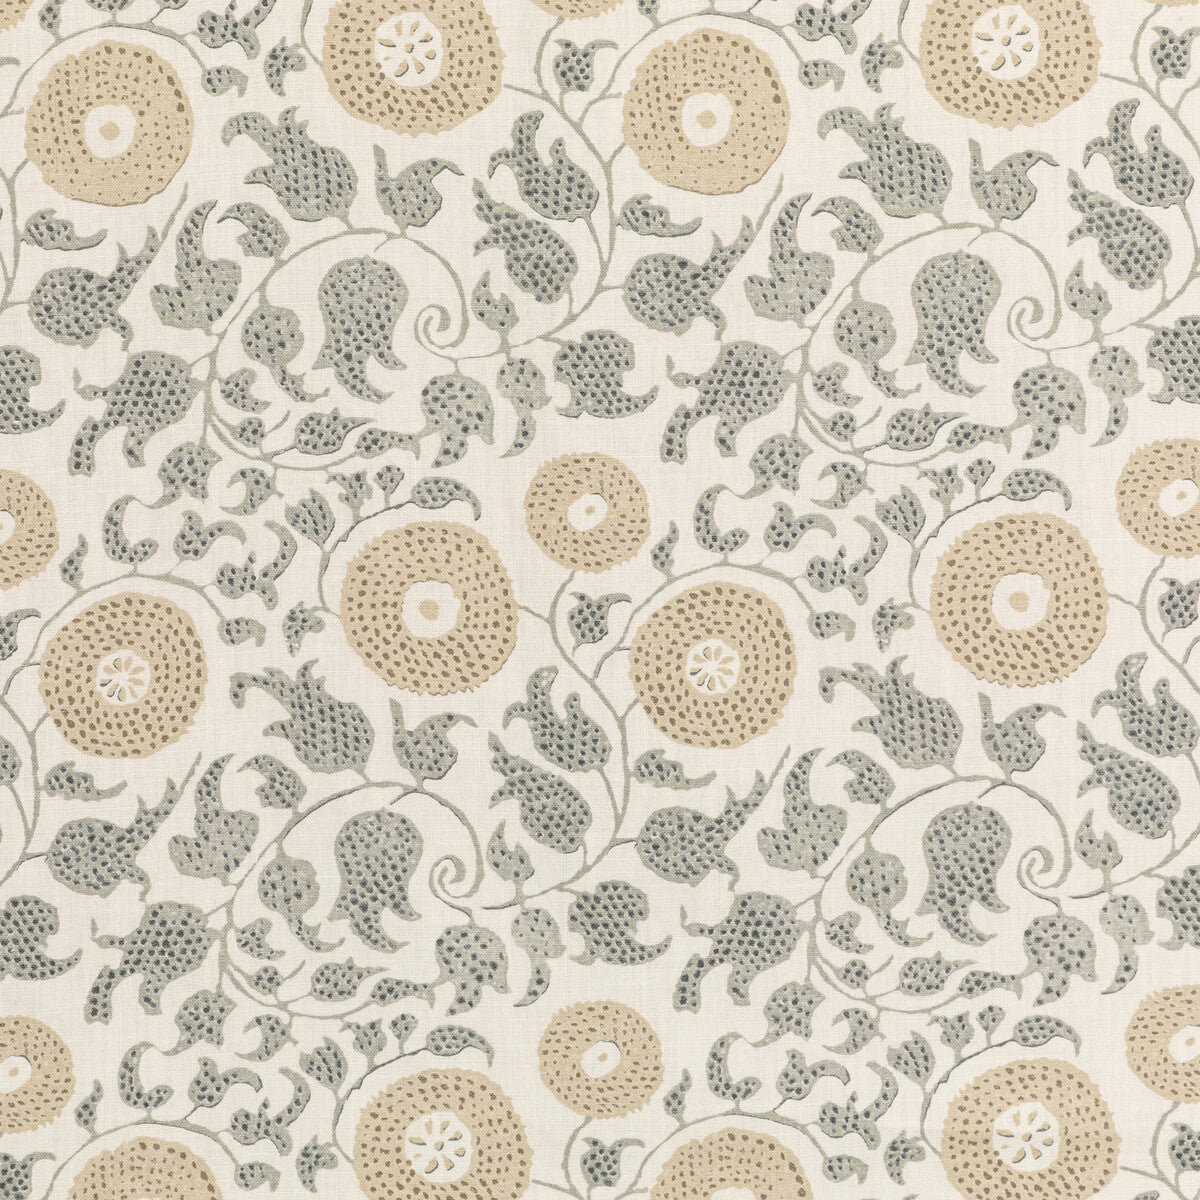 Eldora Print fabric in flax color - pattern 2020204.1611.0 - by Lee Jofa in the Breckenridge collection